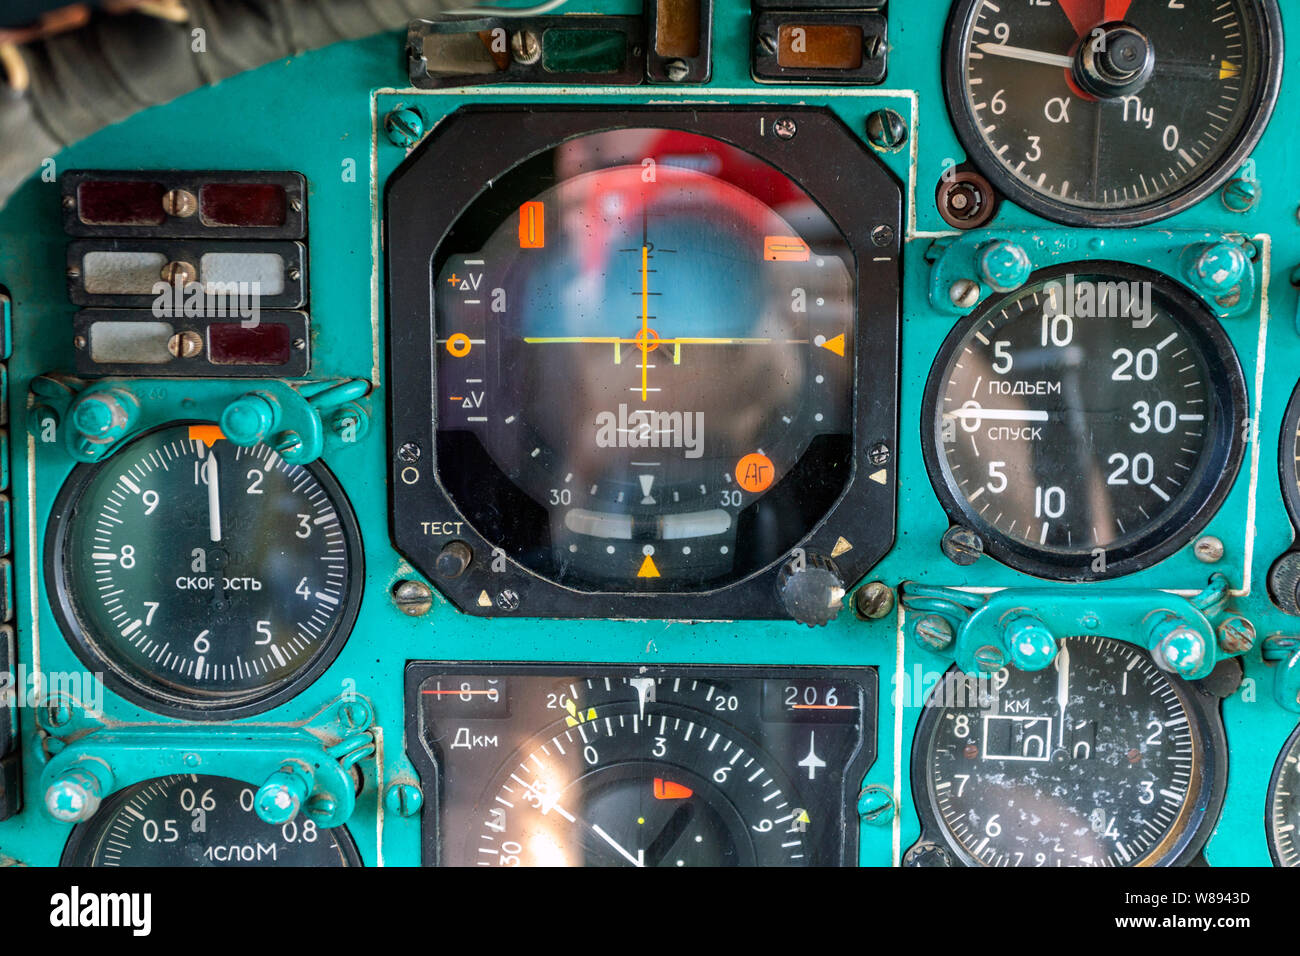 Instrument panel of an old russian airplane Stock Photo - Alamy